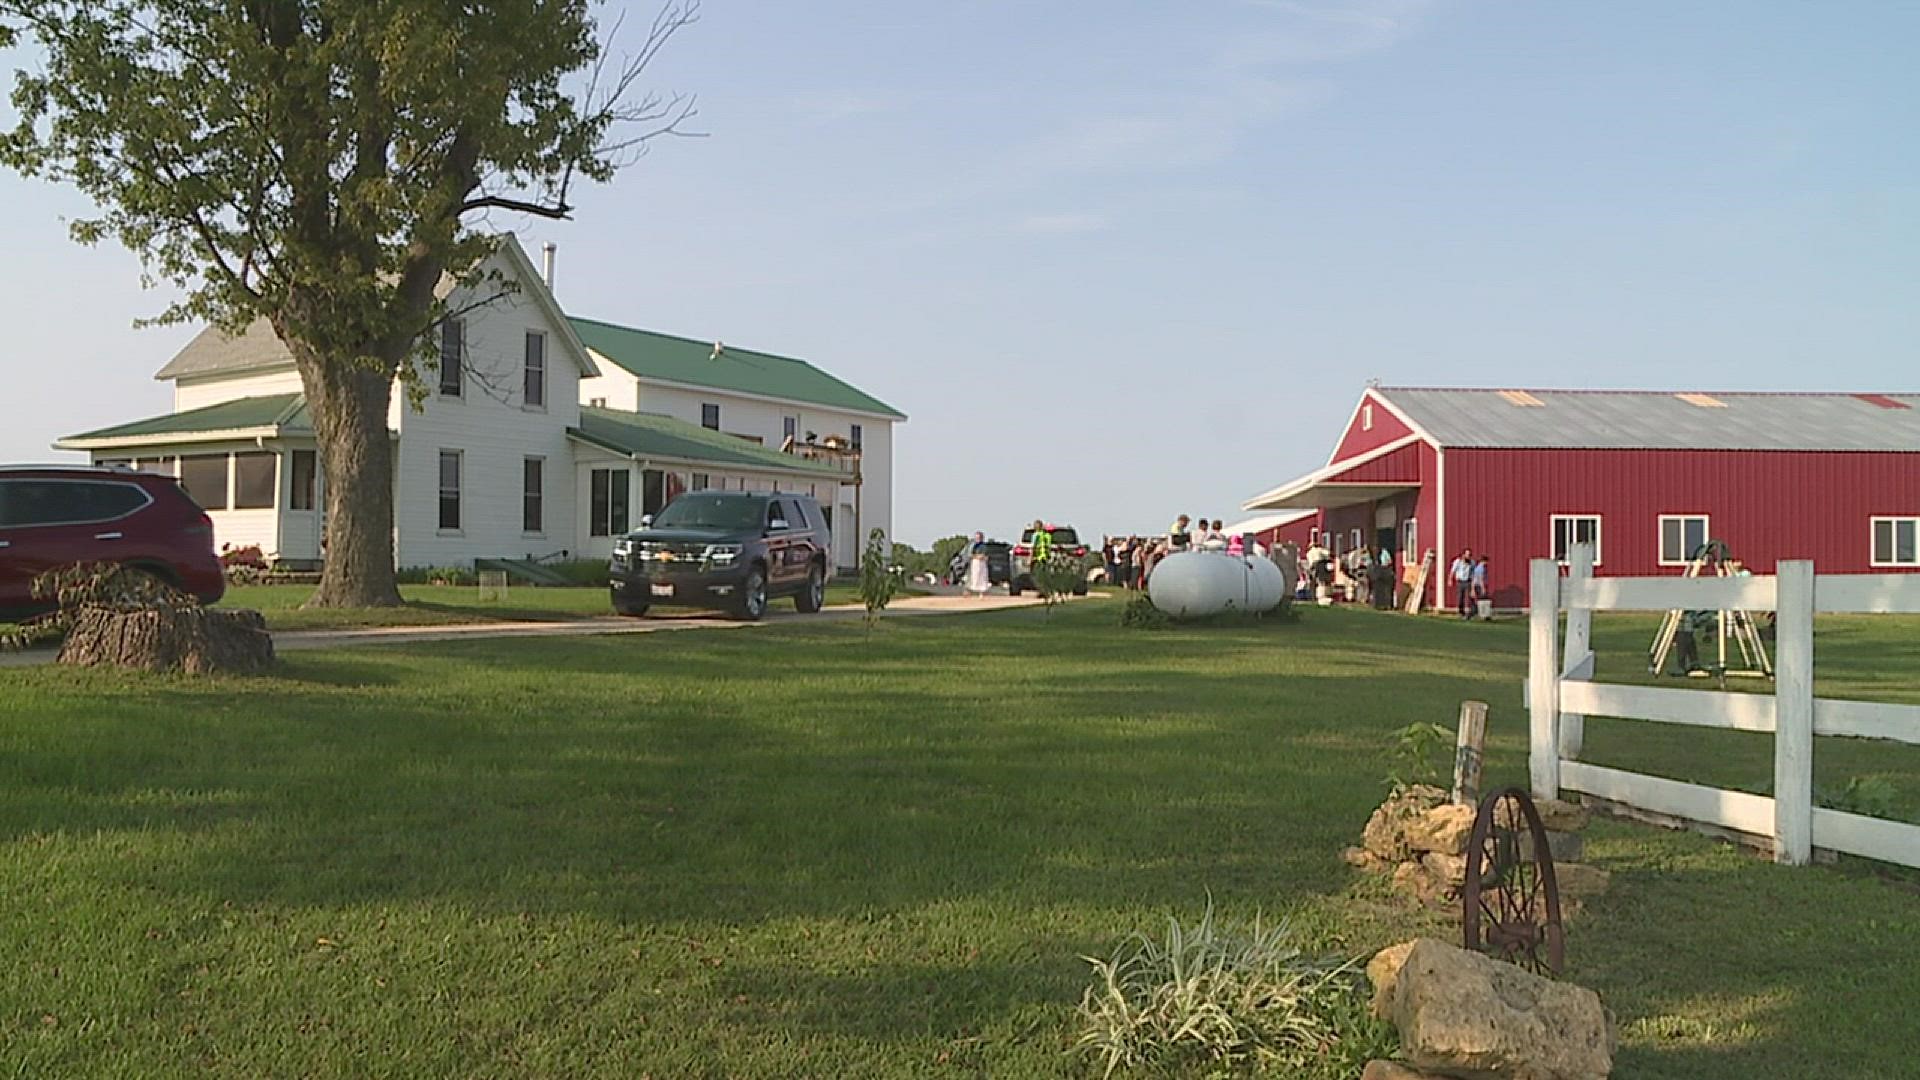 The Amish community hosted a haystack dinner on Wednesday to help raise money for the couple's medical bills.